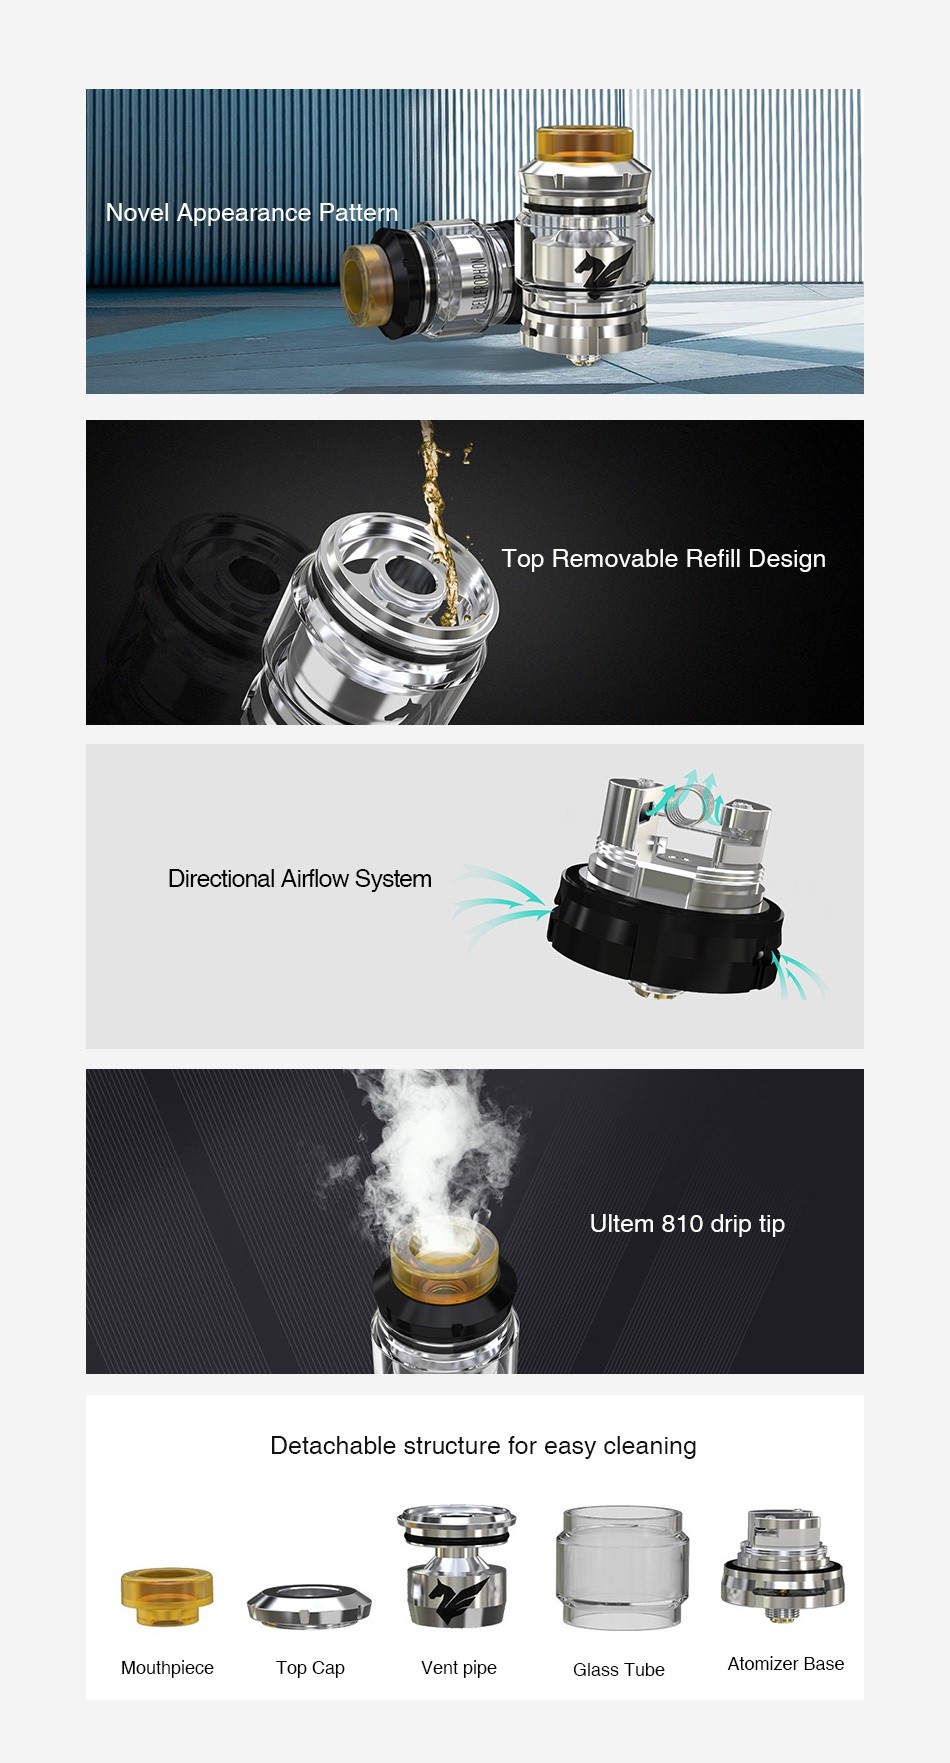 WISMEC Bellerophon RTA 4ml Novel Appearance Pattern ImmUn Top Removable Refill Design Directional Airflow System Ultem 810 drip tip Detachable structure for easy cleaning Mouthpiece op cap Vent pipe Glass Tube Atomizer base